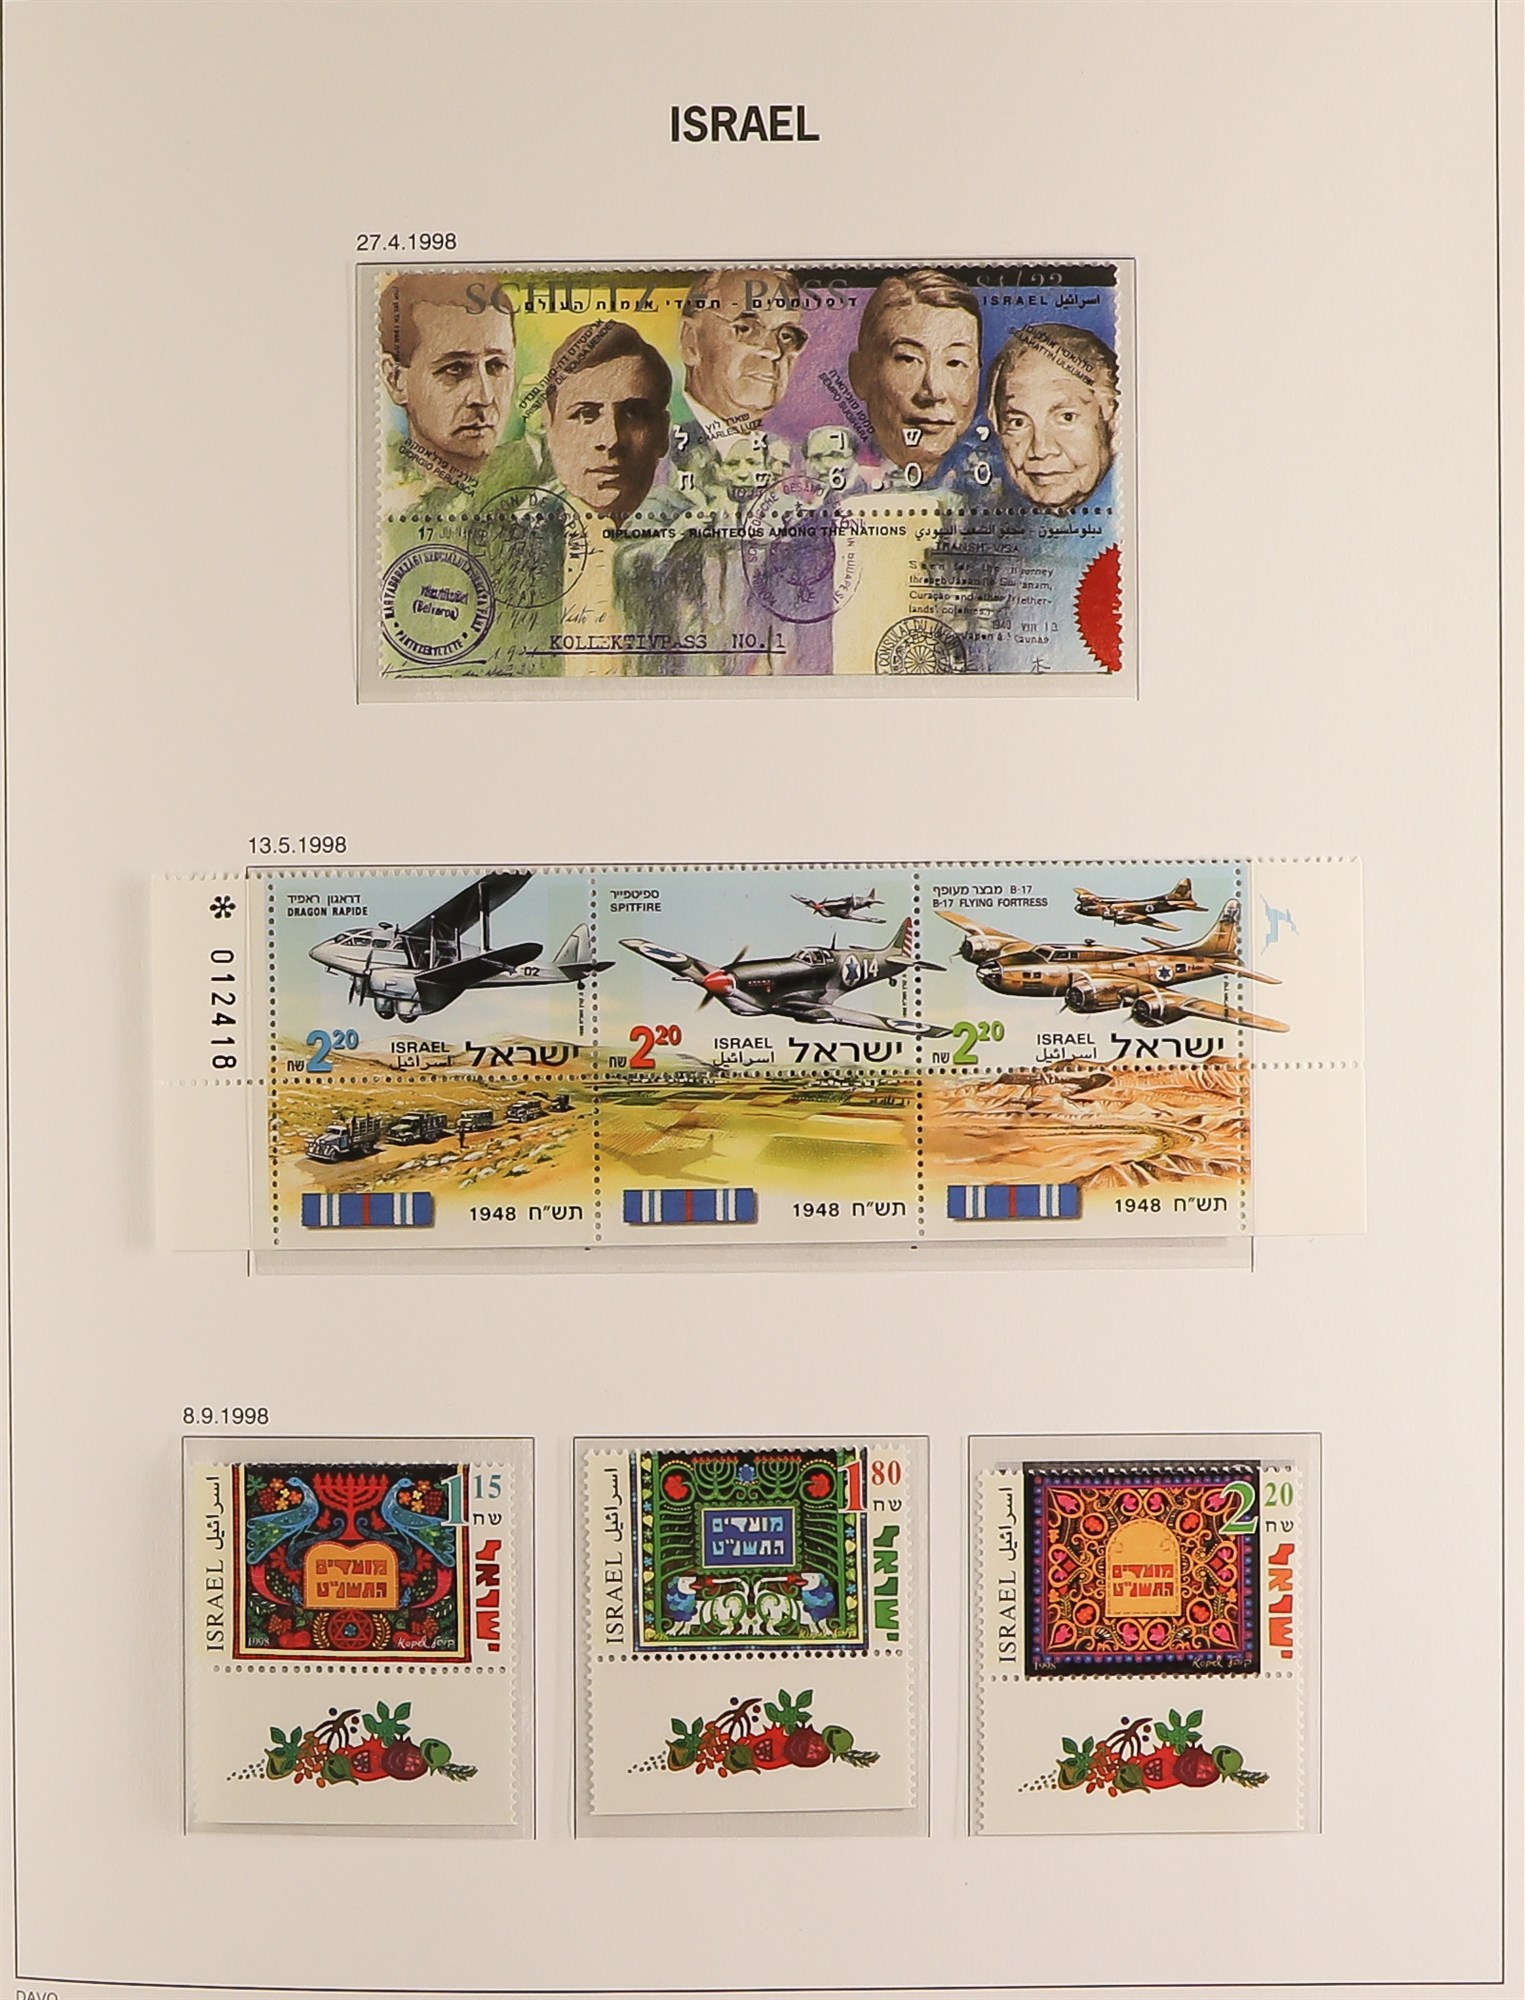 ISRAEL 1960 - 1999 COMPLETE NEVER HINGED MINT COLLECTION in 3 hingeless Davo Israel albums, all - Image 8 of 11